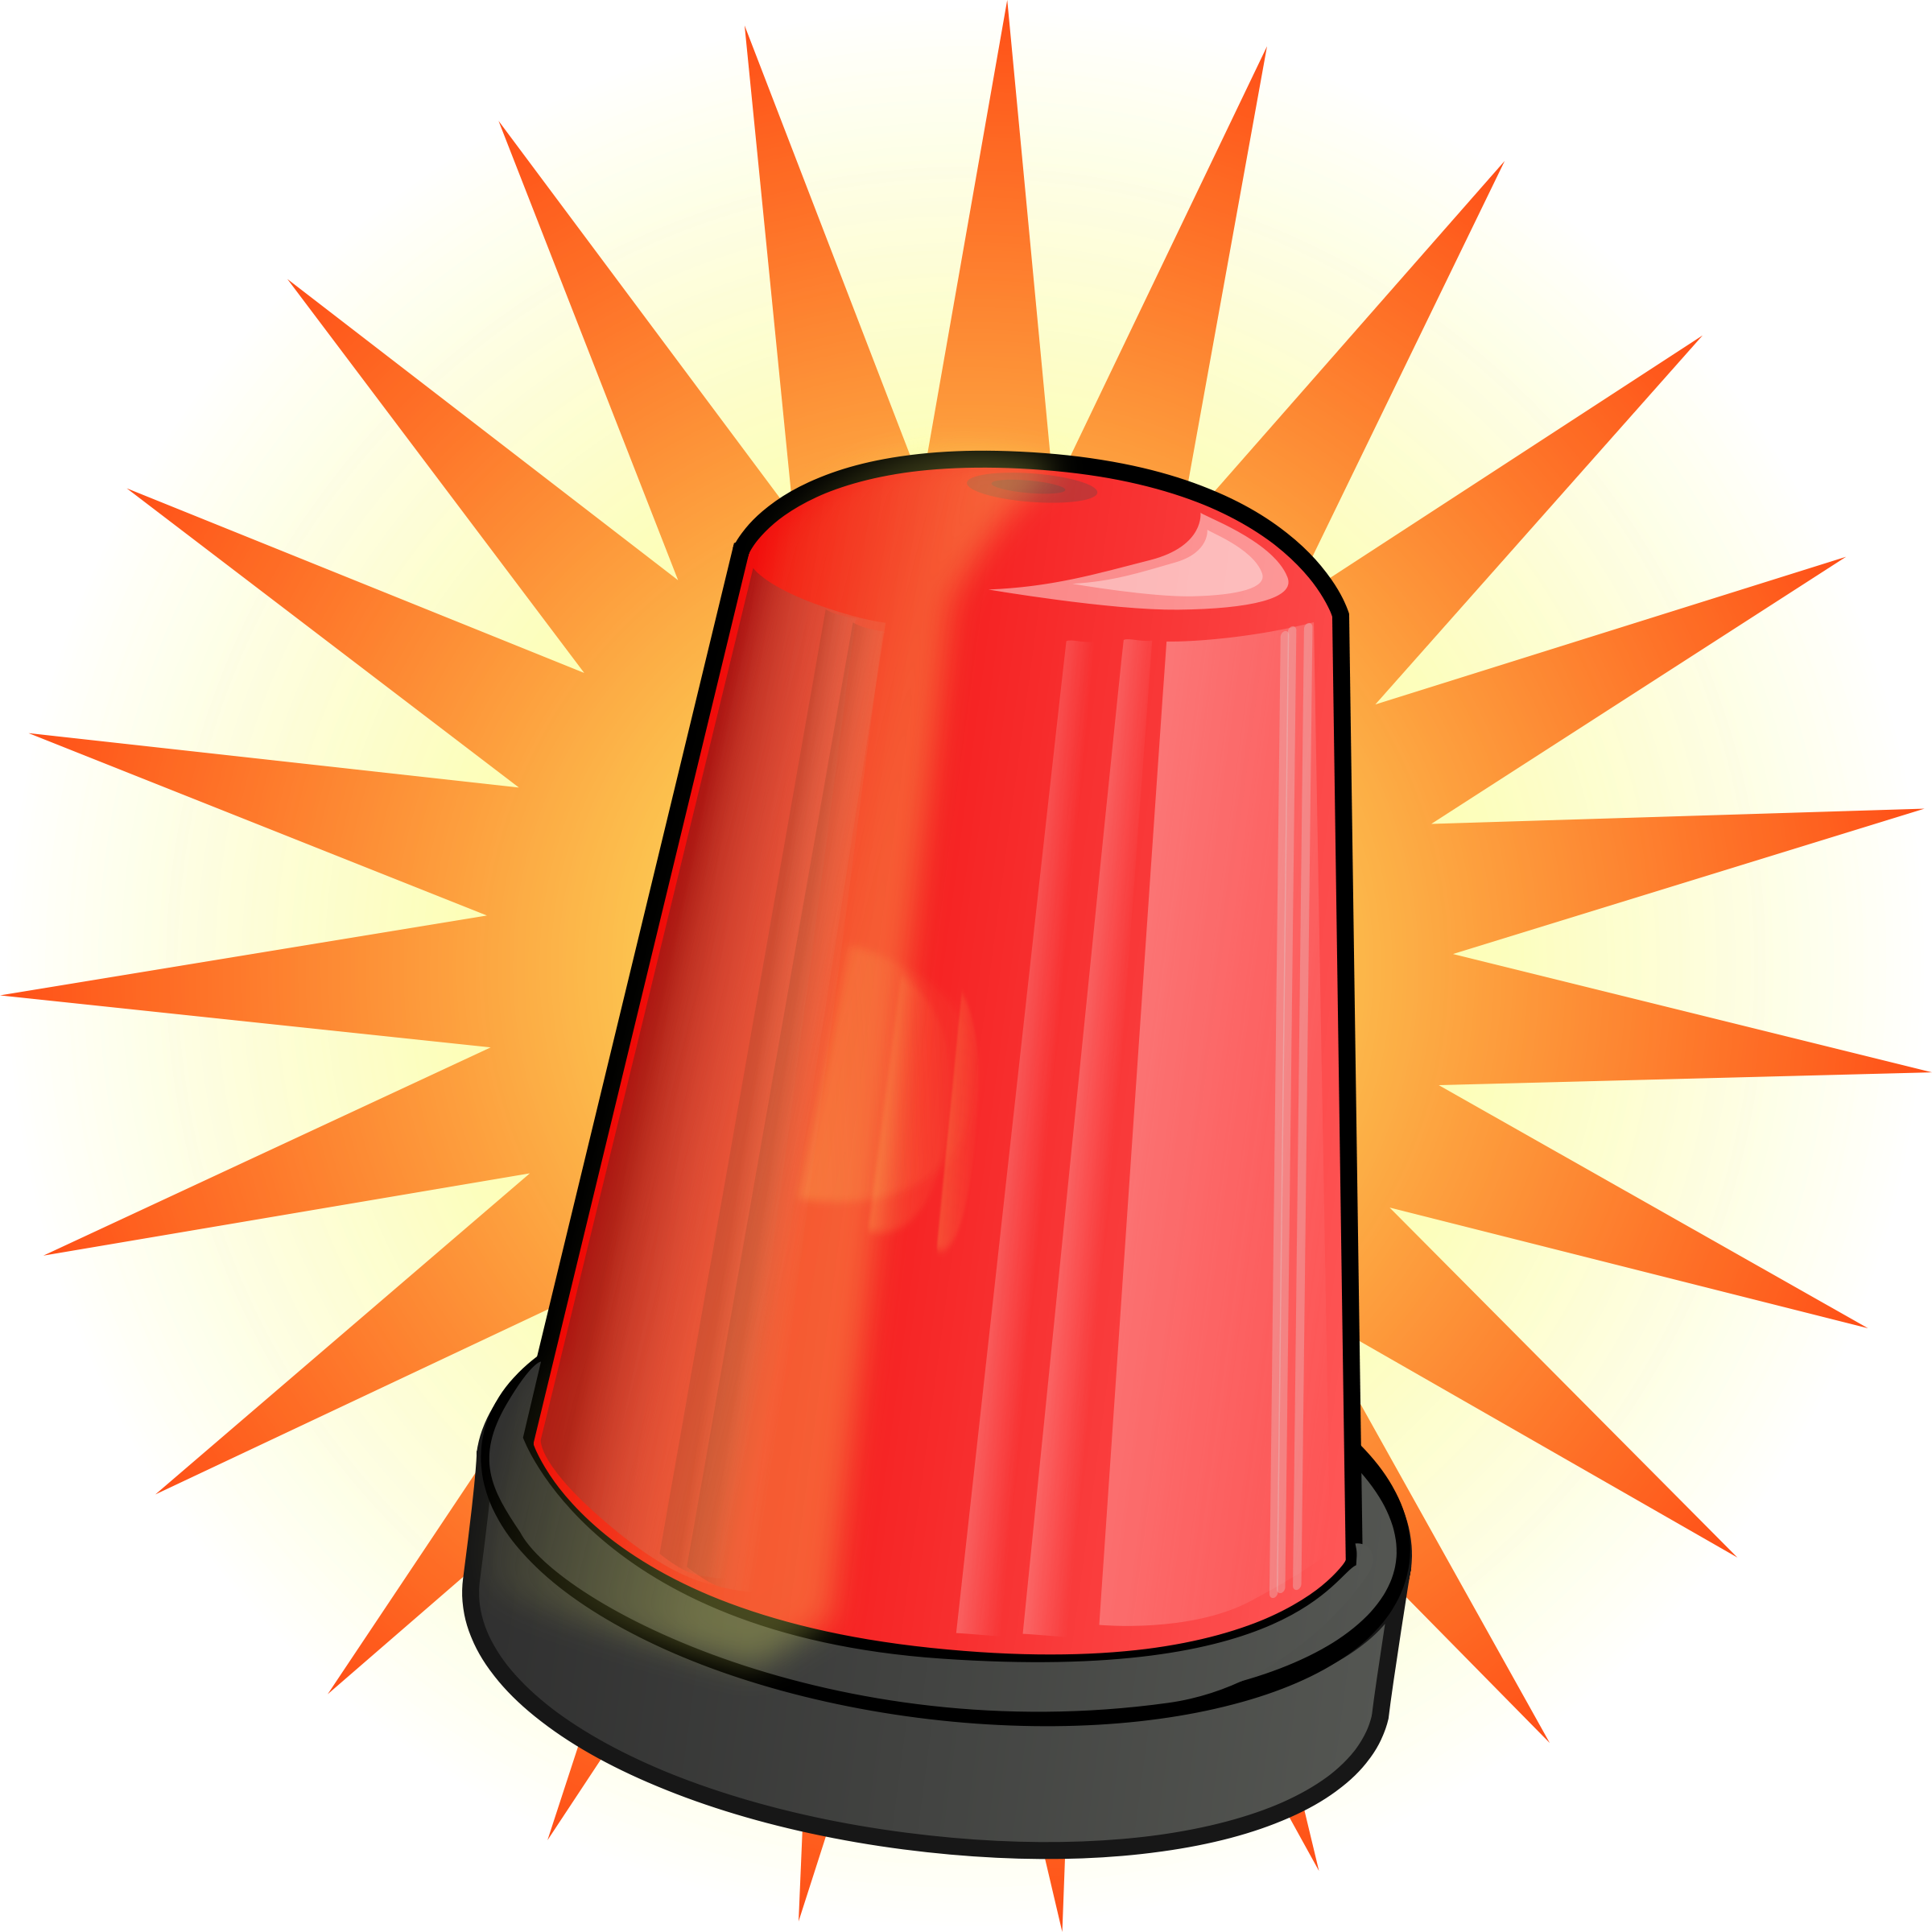 Free Police Siren Png, Download Free Police Siren Png png images, Free